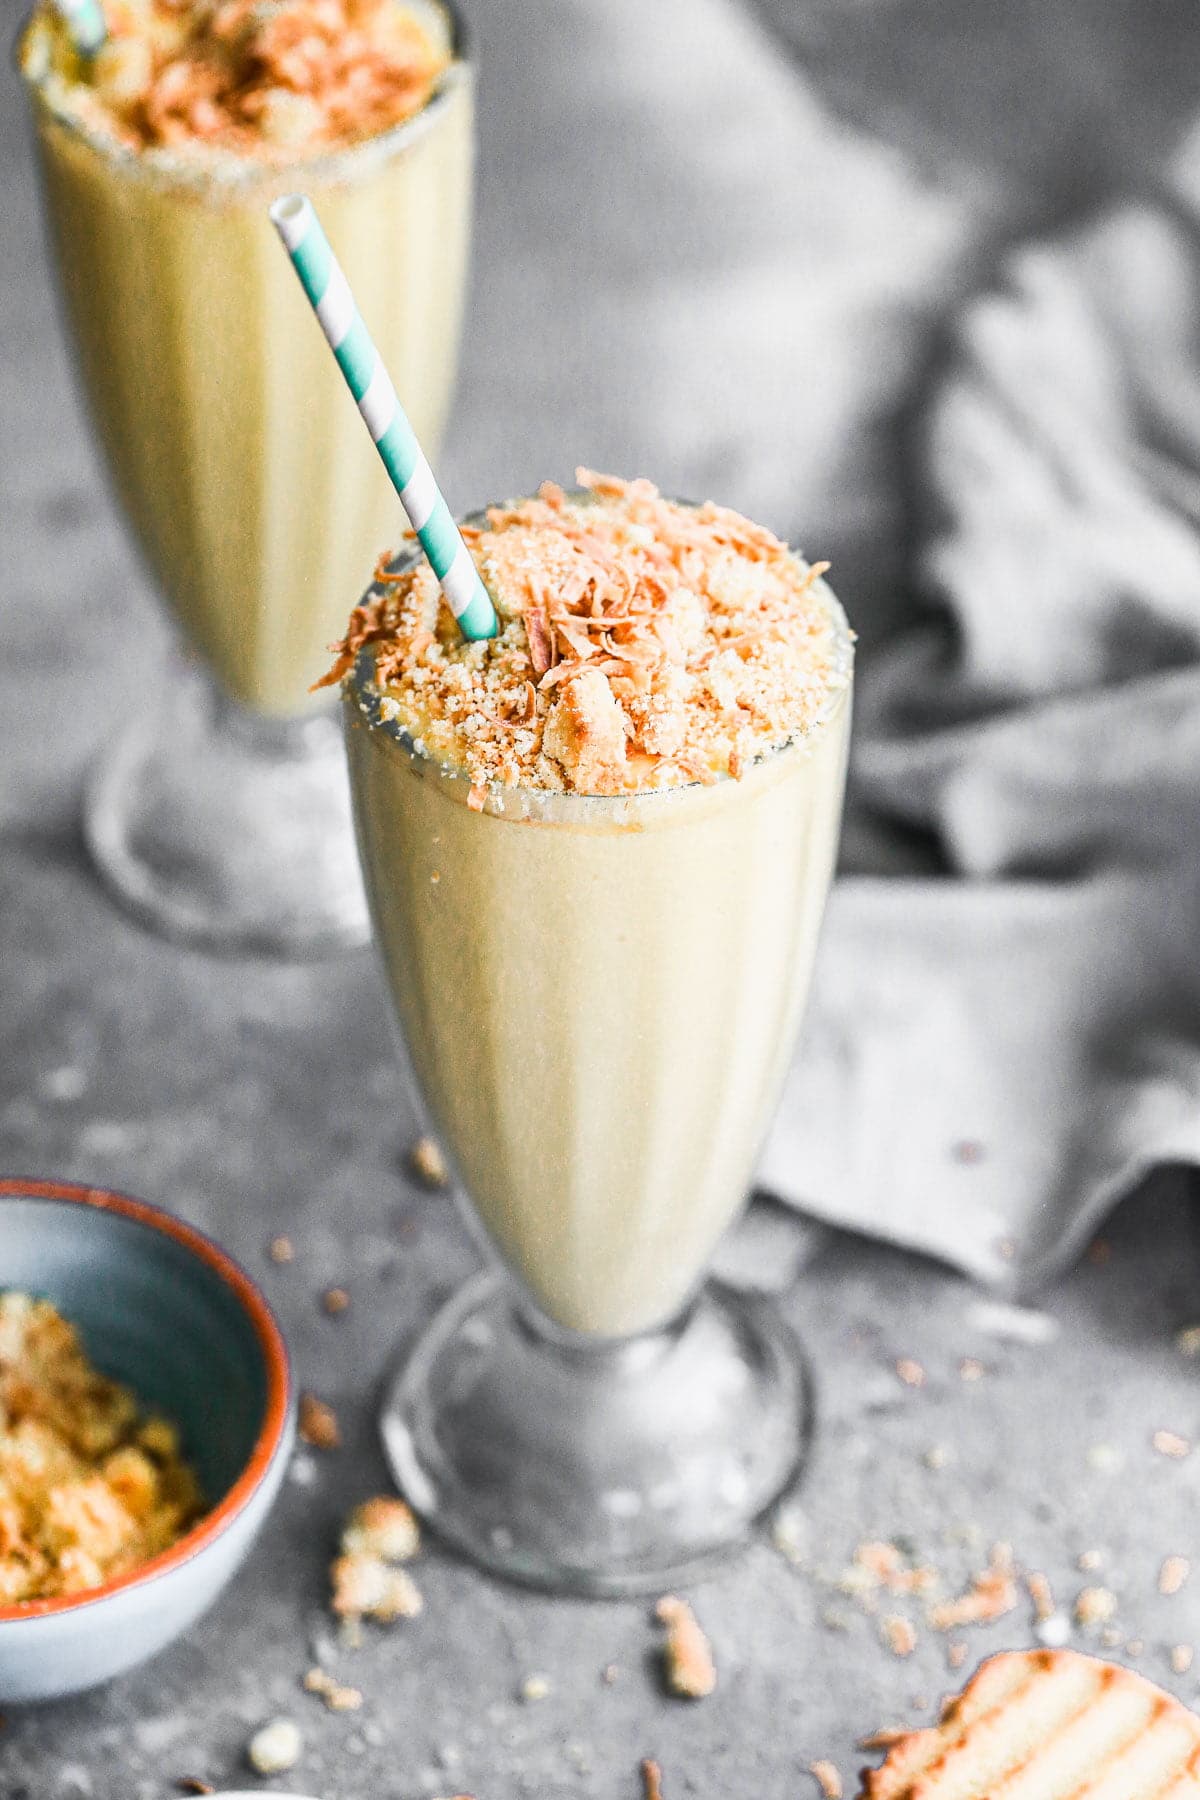 We're celebrating Oster's 75th Blending Anniversary with a Tropical Smoothie worthy of any special occasion. Filled with all your favorite tropical flavors - pineapple, mango, and coconut - this easy-to-throw-together smoothie turned dessert is irresistibly sweet, brimming with beach vibes and here to party. We top each ultra smooth, cold smoothie with toasted coconut and crushed shortbread cookies for the perfect play on texture. Don't miss this one!&nbsp;